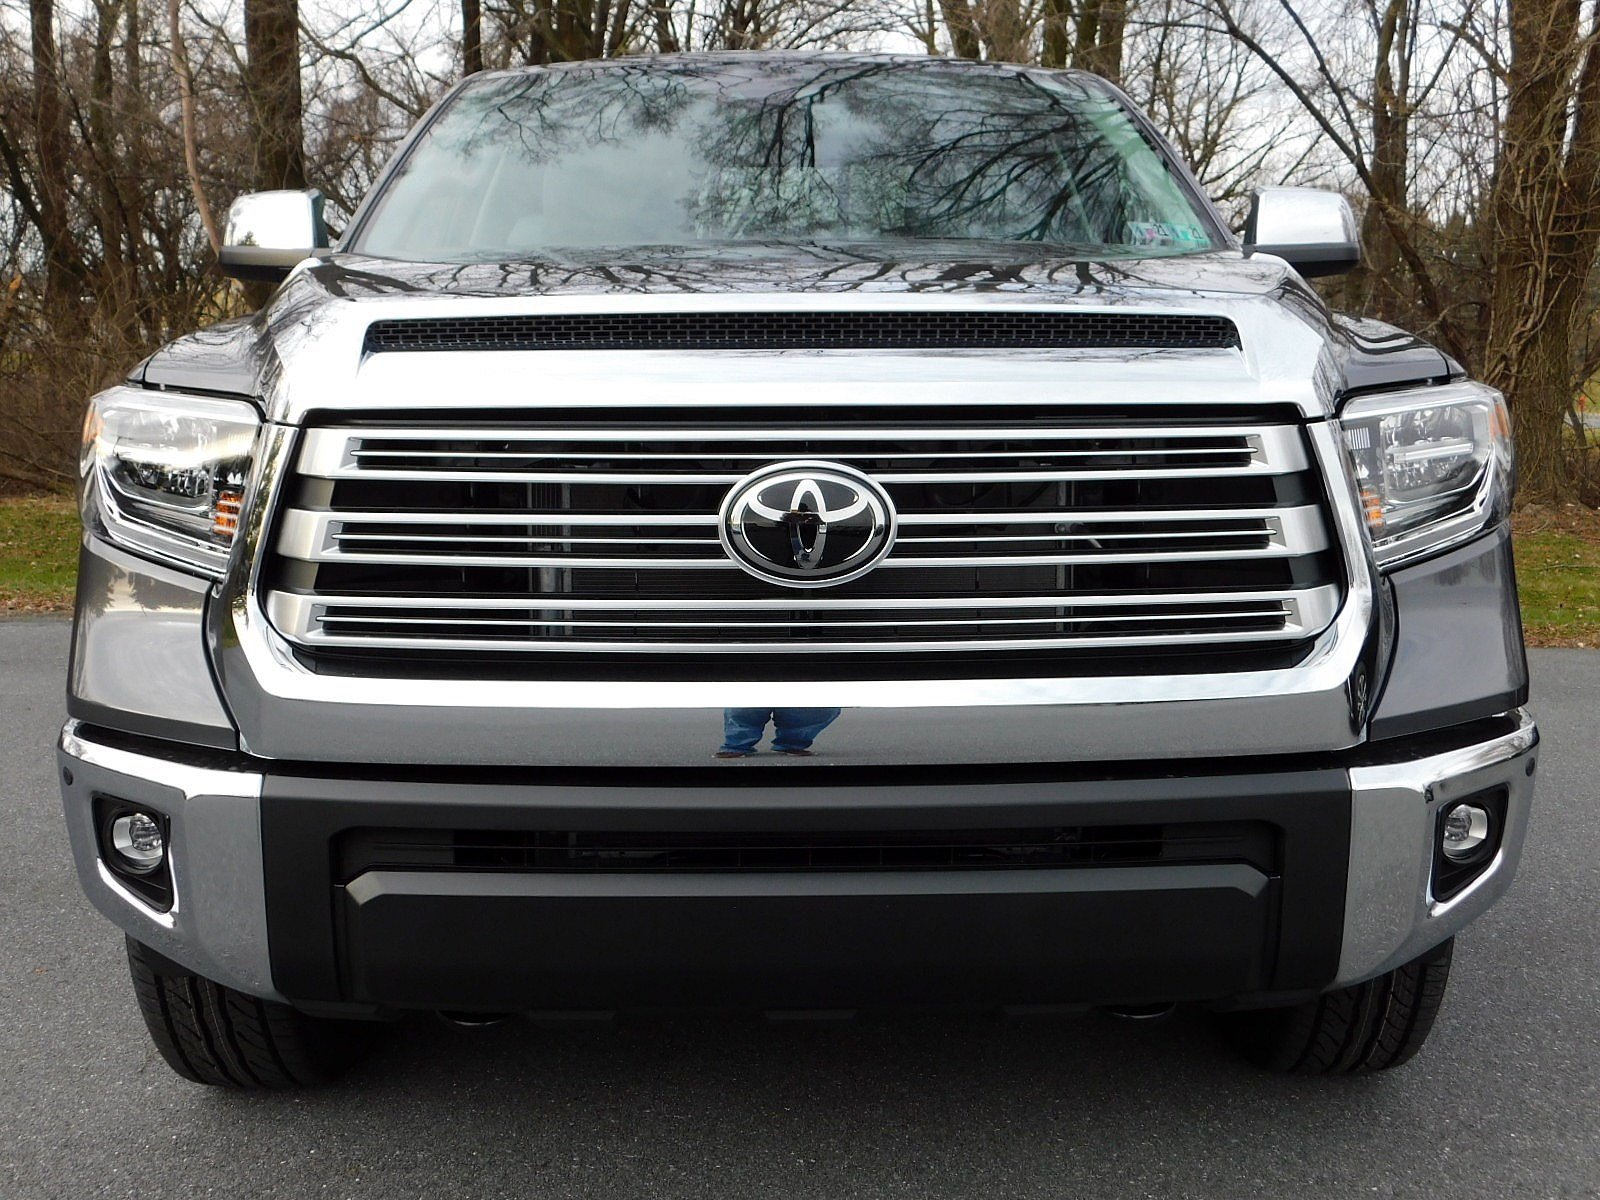 New 2020 Toyota Tundra Limited Double Cab in East Petersburg #14449